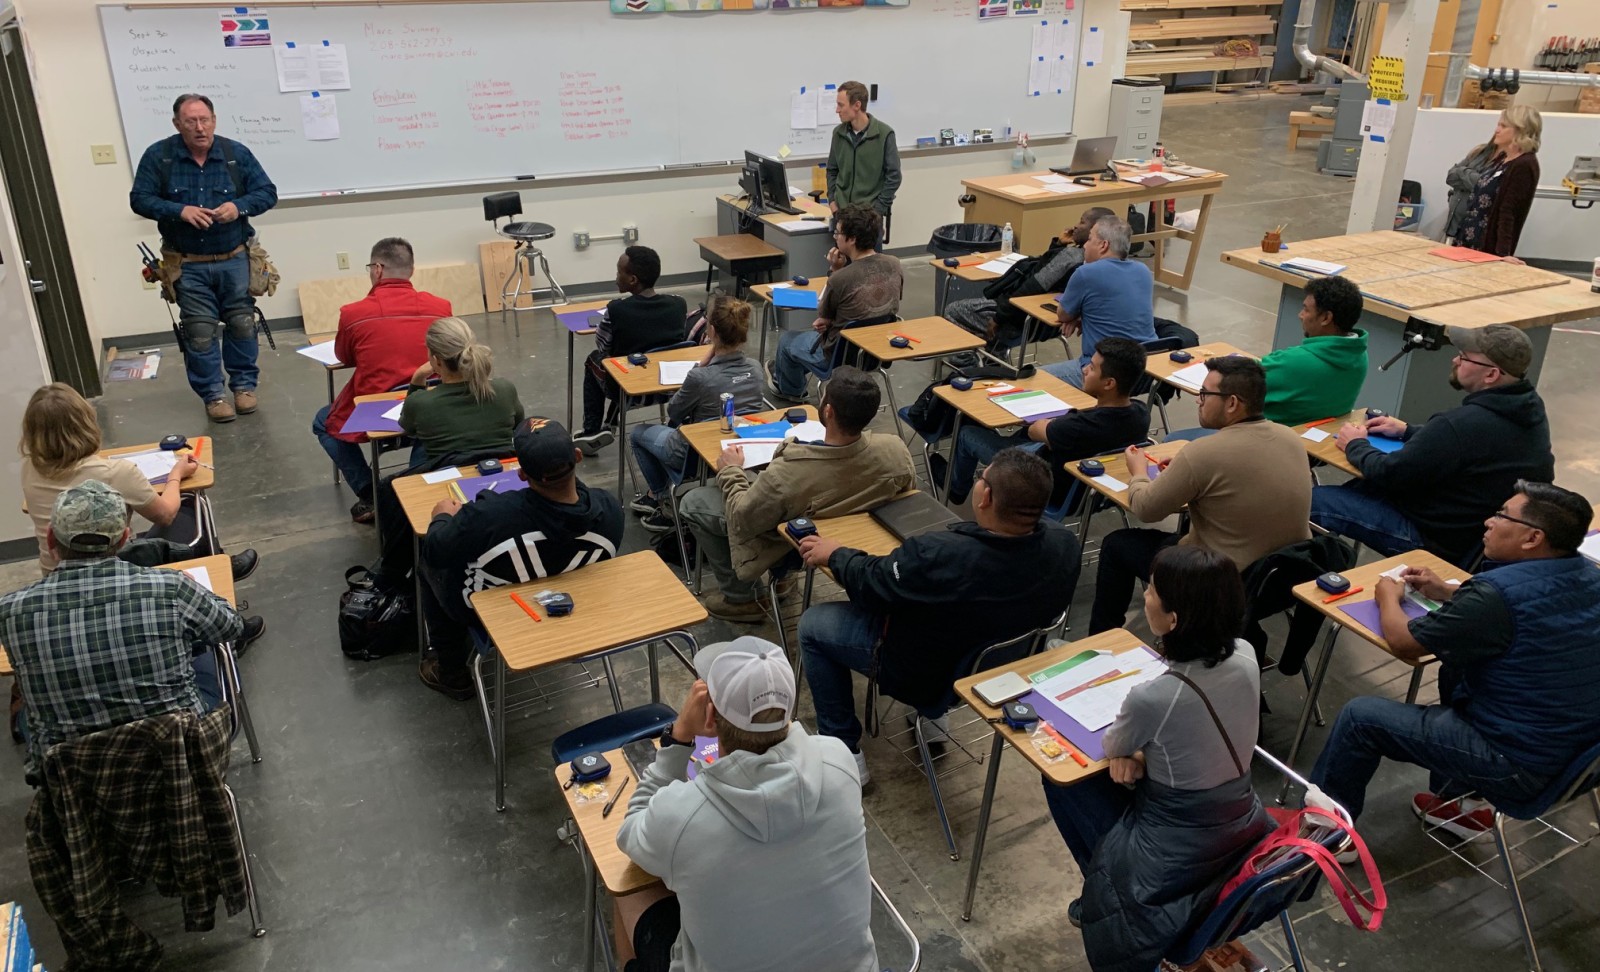 Construction Career Launcher classes kicked off on Tuesday, Oct. 1, and are off to another great start with 22 students.